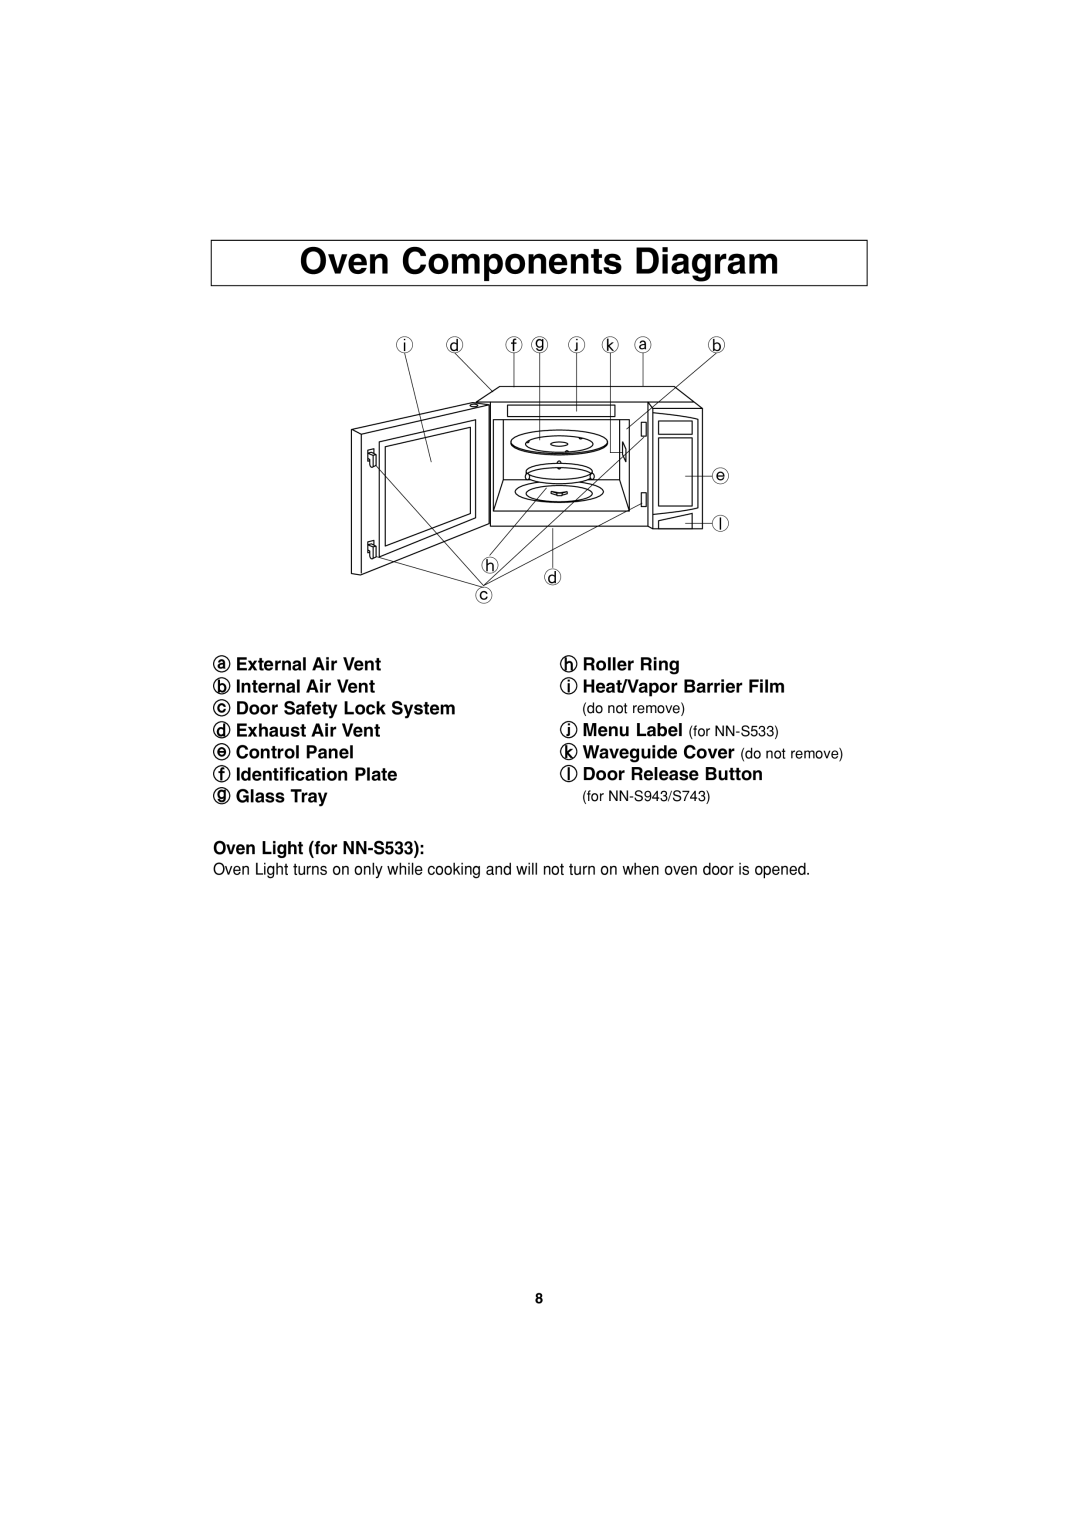 Panasonic NN-S943, NN-S743, NN-S533 important safety instructions Oven Components Diagram 